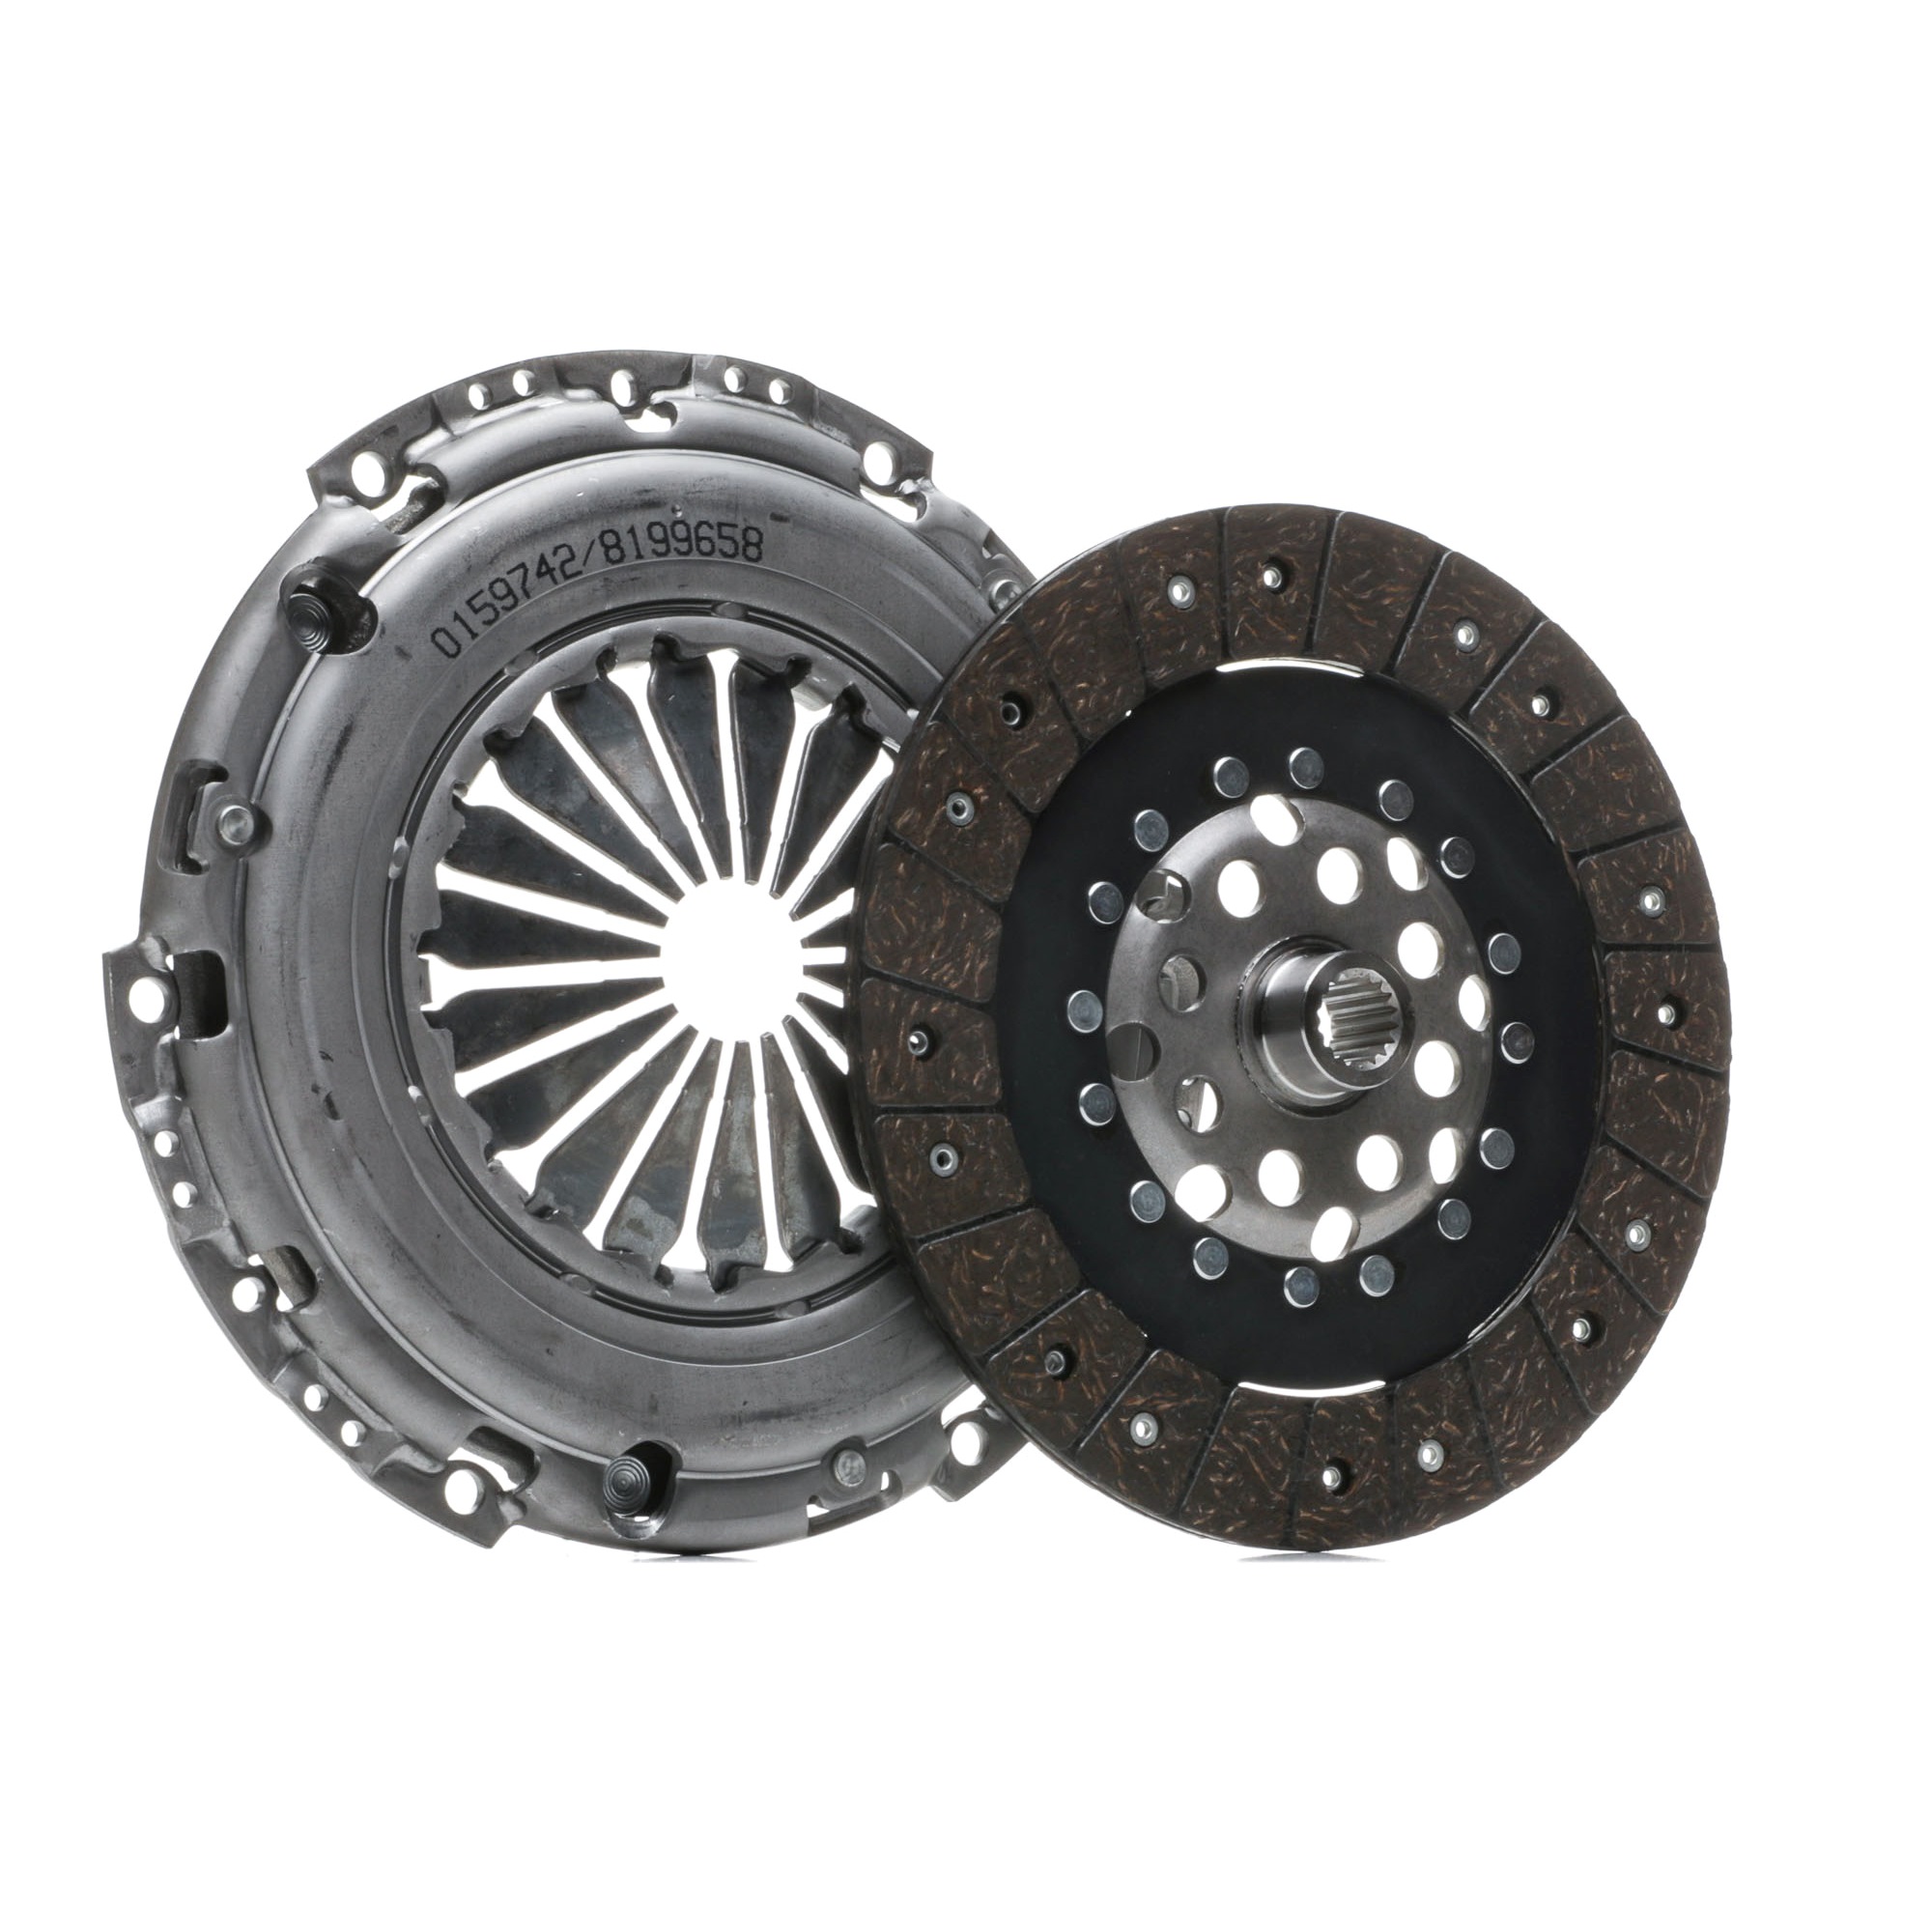 STARK SKCK-0100232 Clutch kit two-piece, with clutch pressure plate, with clutch disc, 228mm